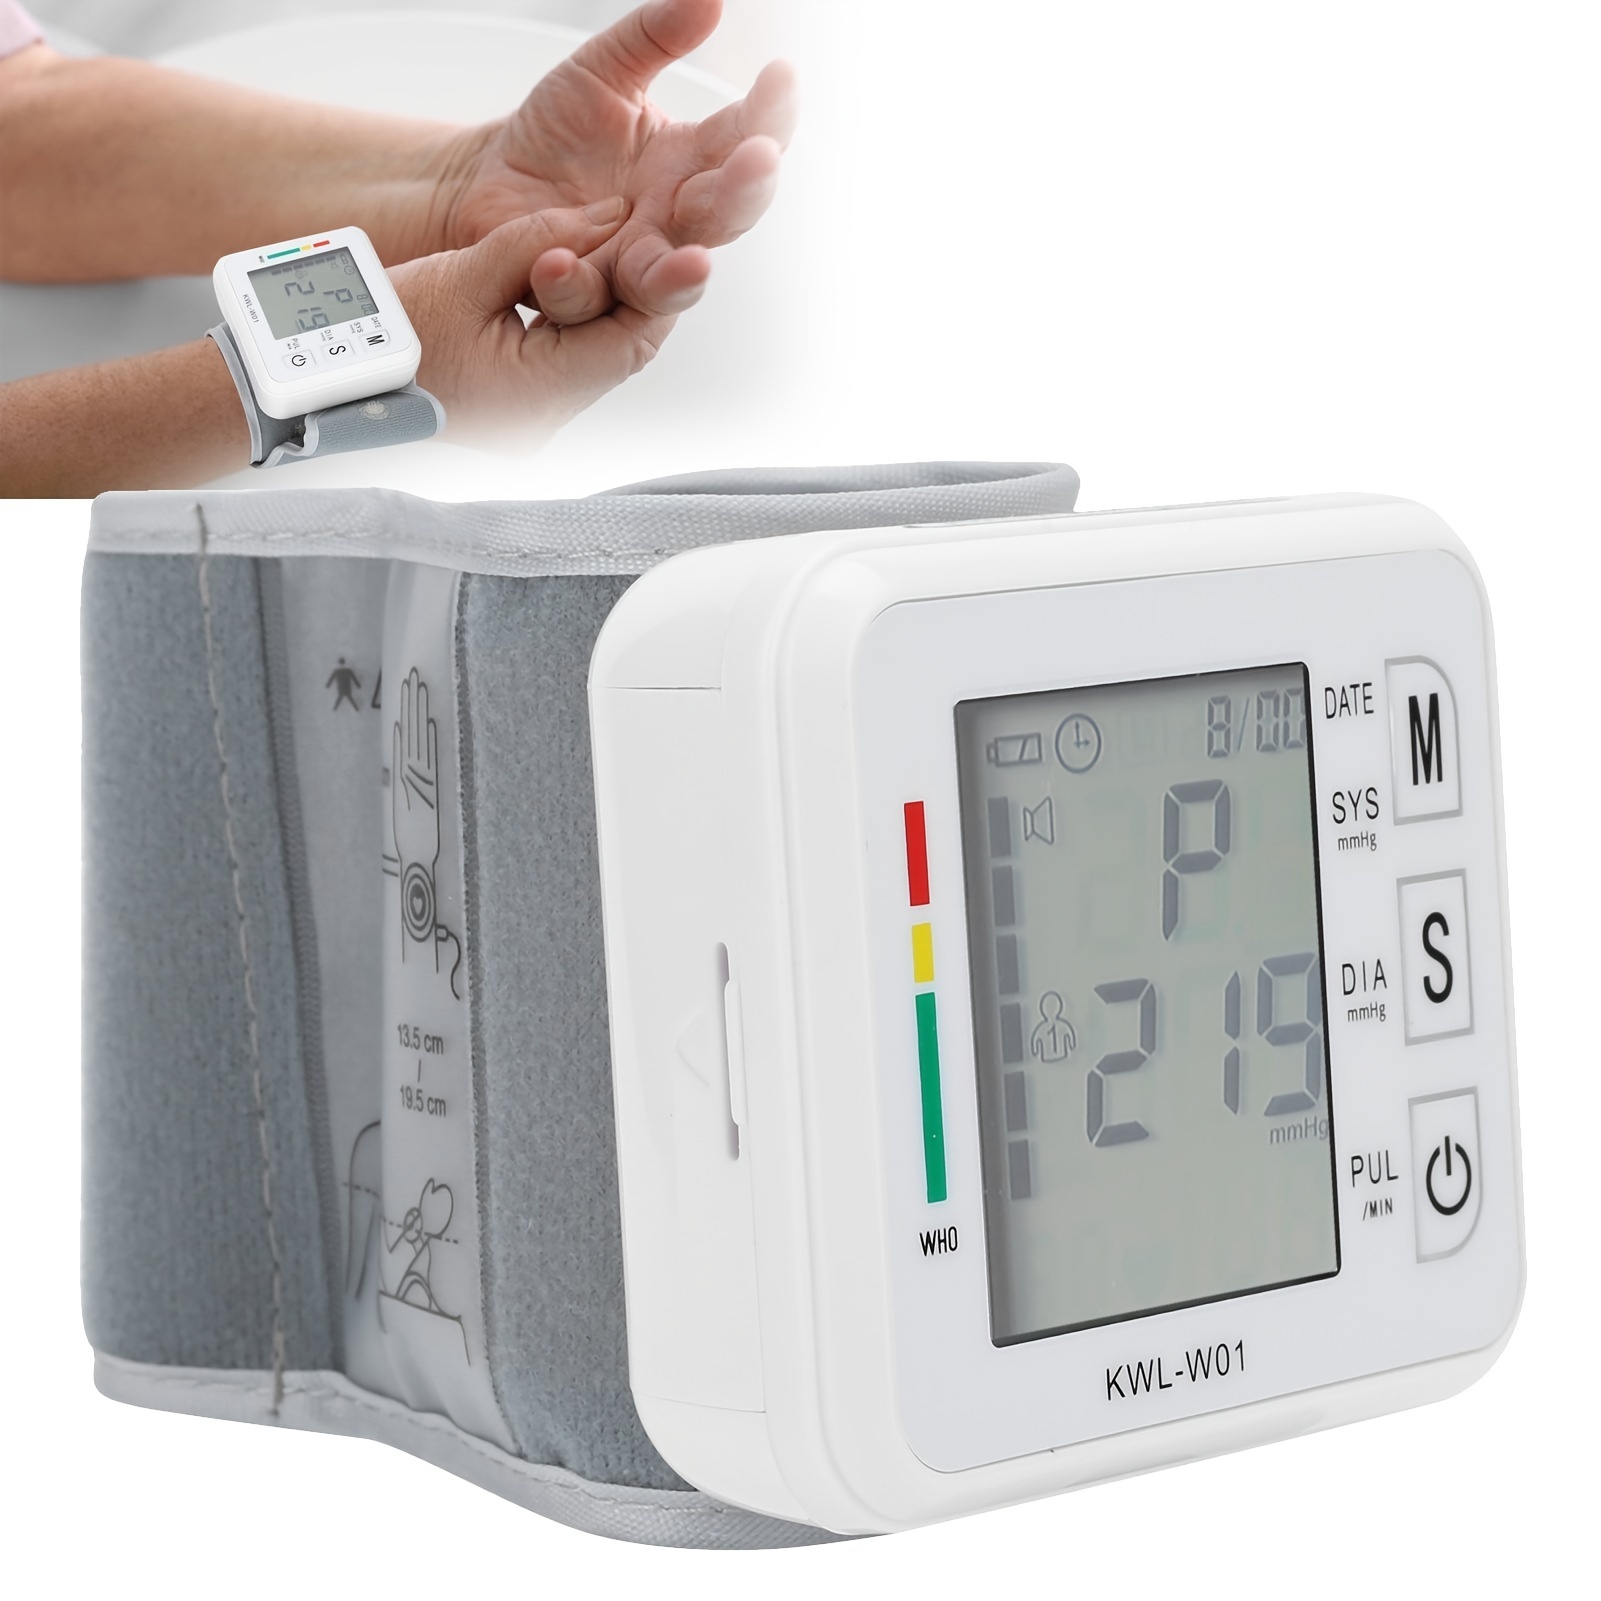 Blood Pressure Monitor Talking for Wrist – The Shop at The Sight